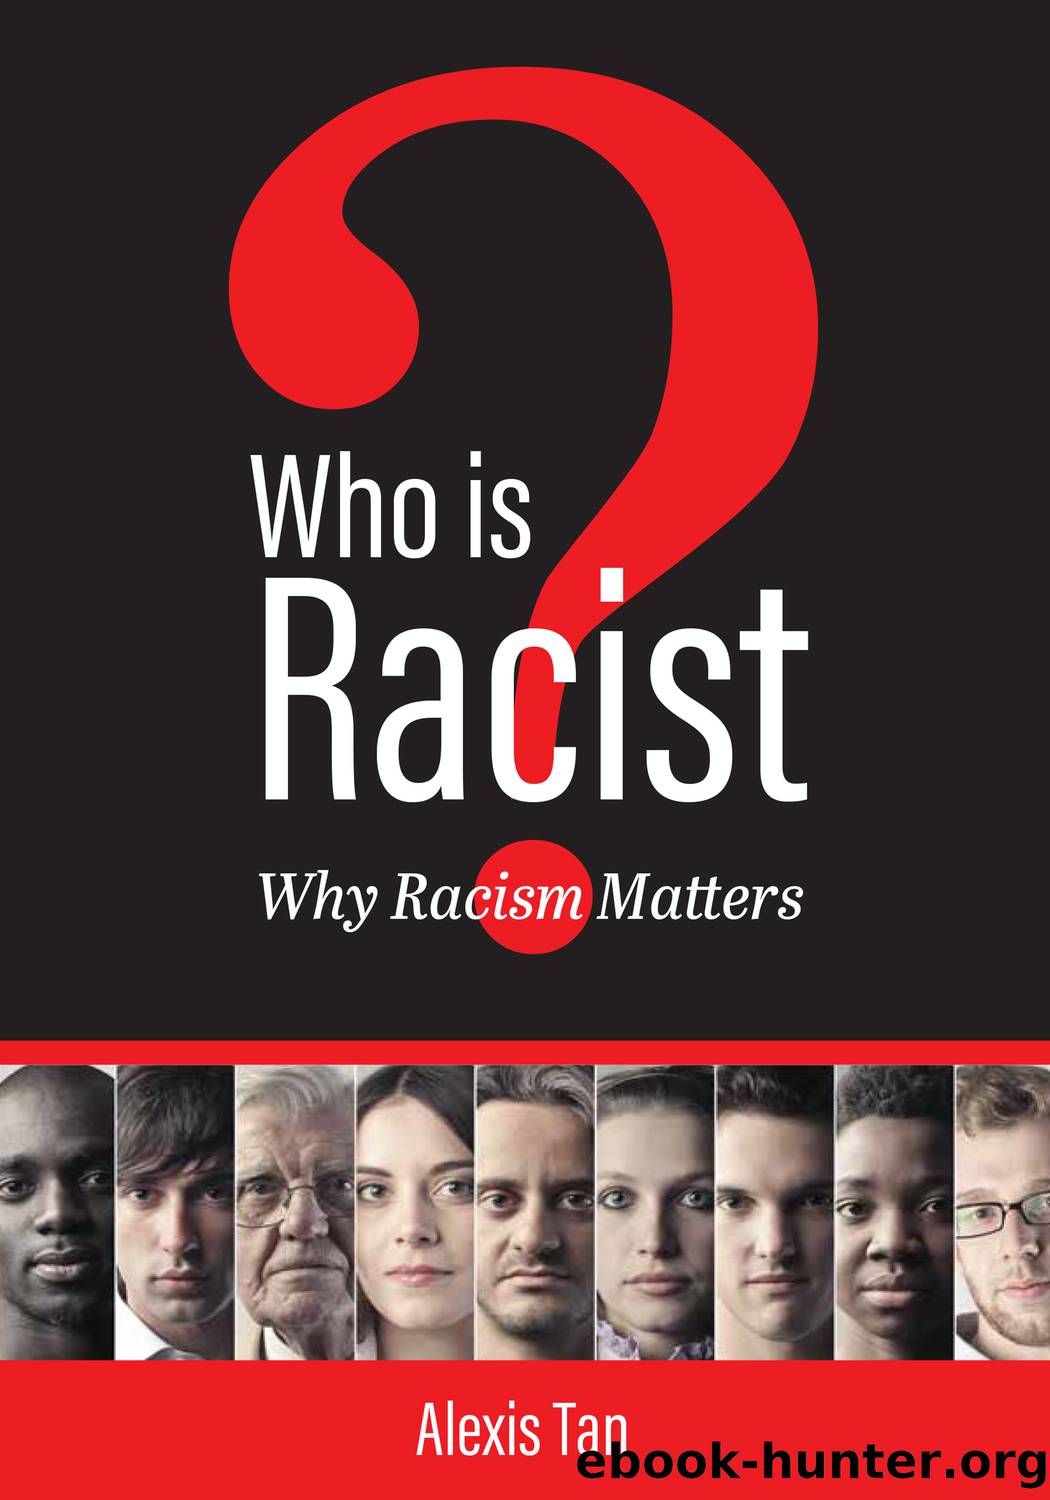 Who is Racist? Why Racism Matters by Alexis Tan